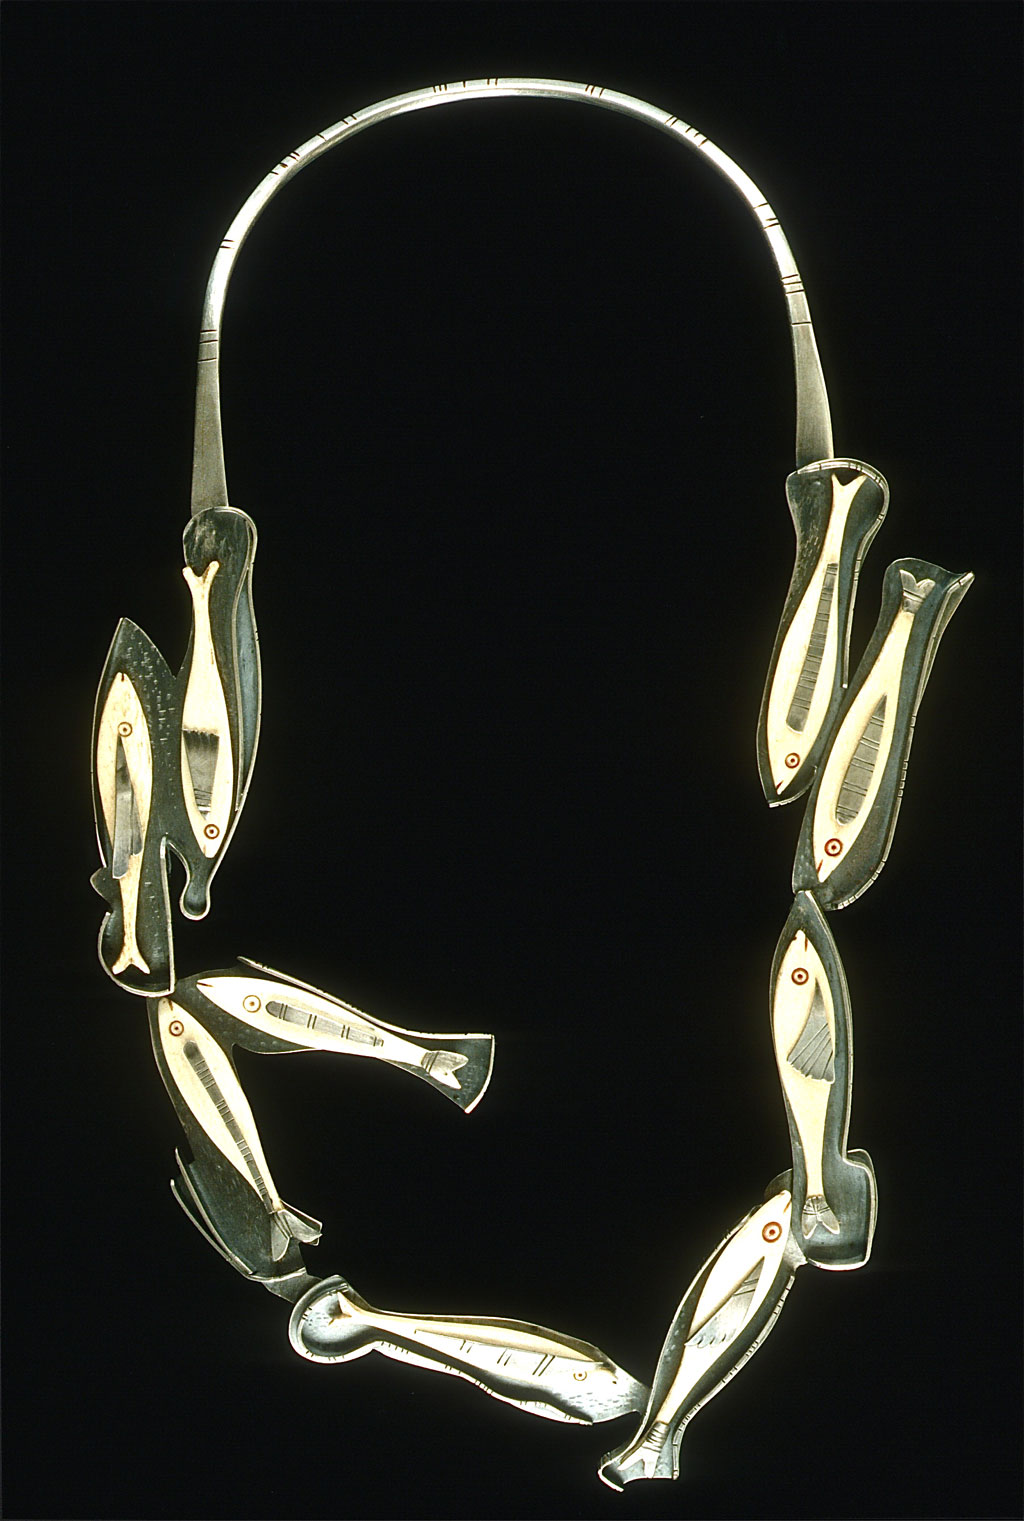 Ron Ho, School Daze, 2003. Bonefish gambling counters with forged and fabricated silver